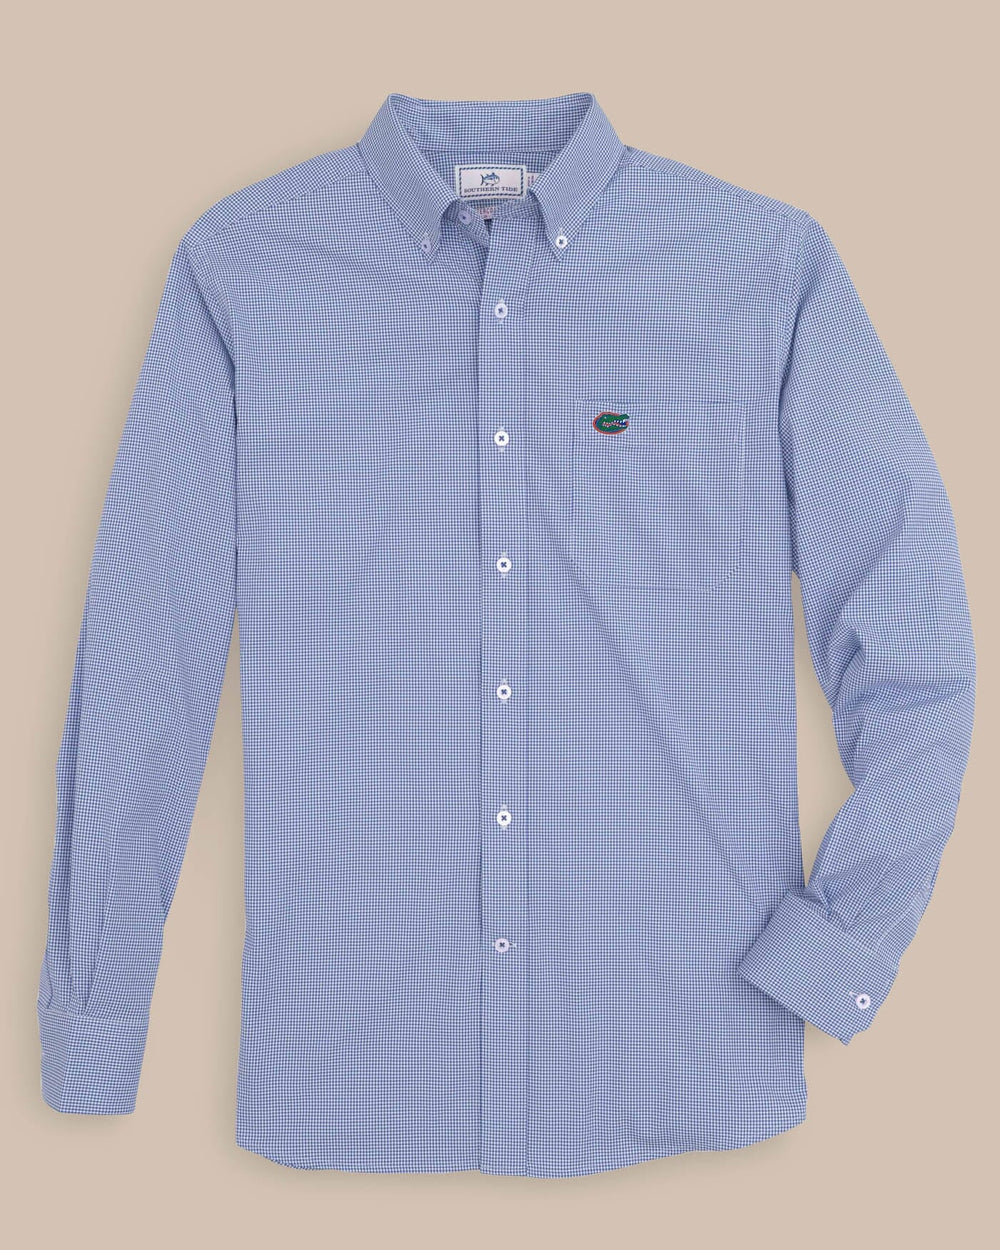 The front view of the Florida Gators Gingham Button Down Shirt by Southern Tide - University Blue